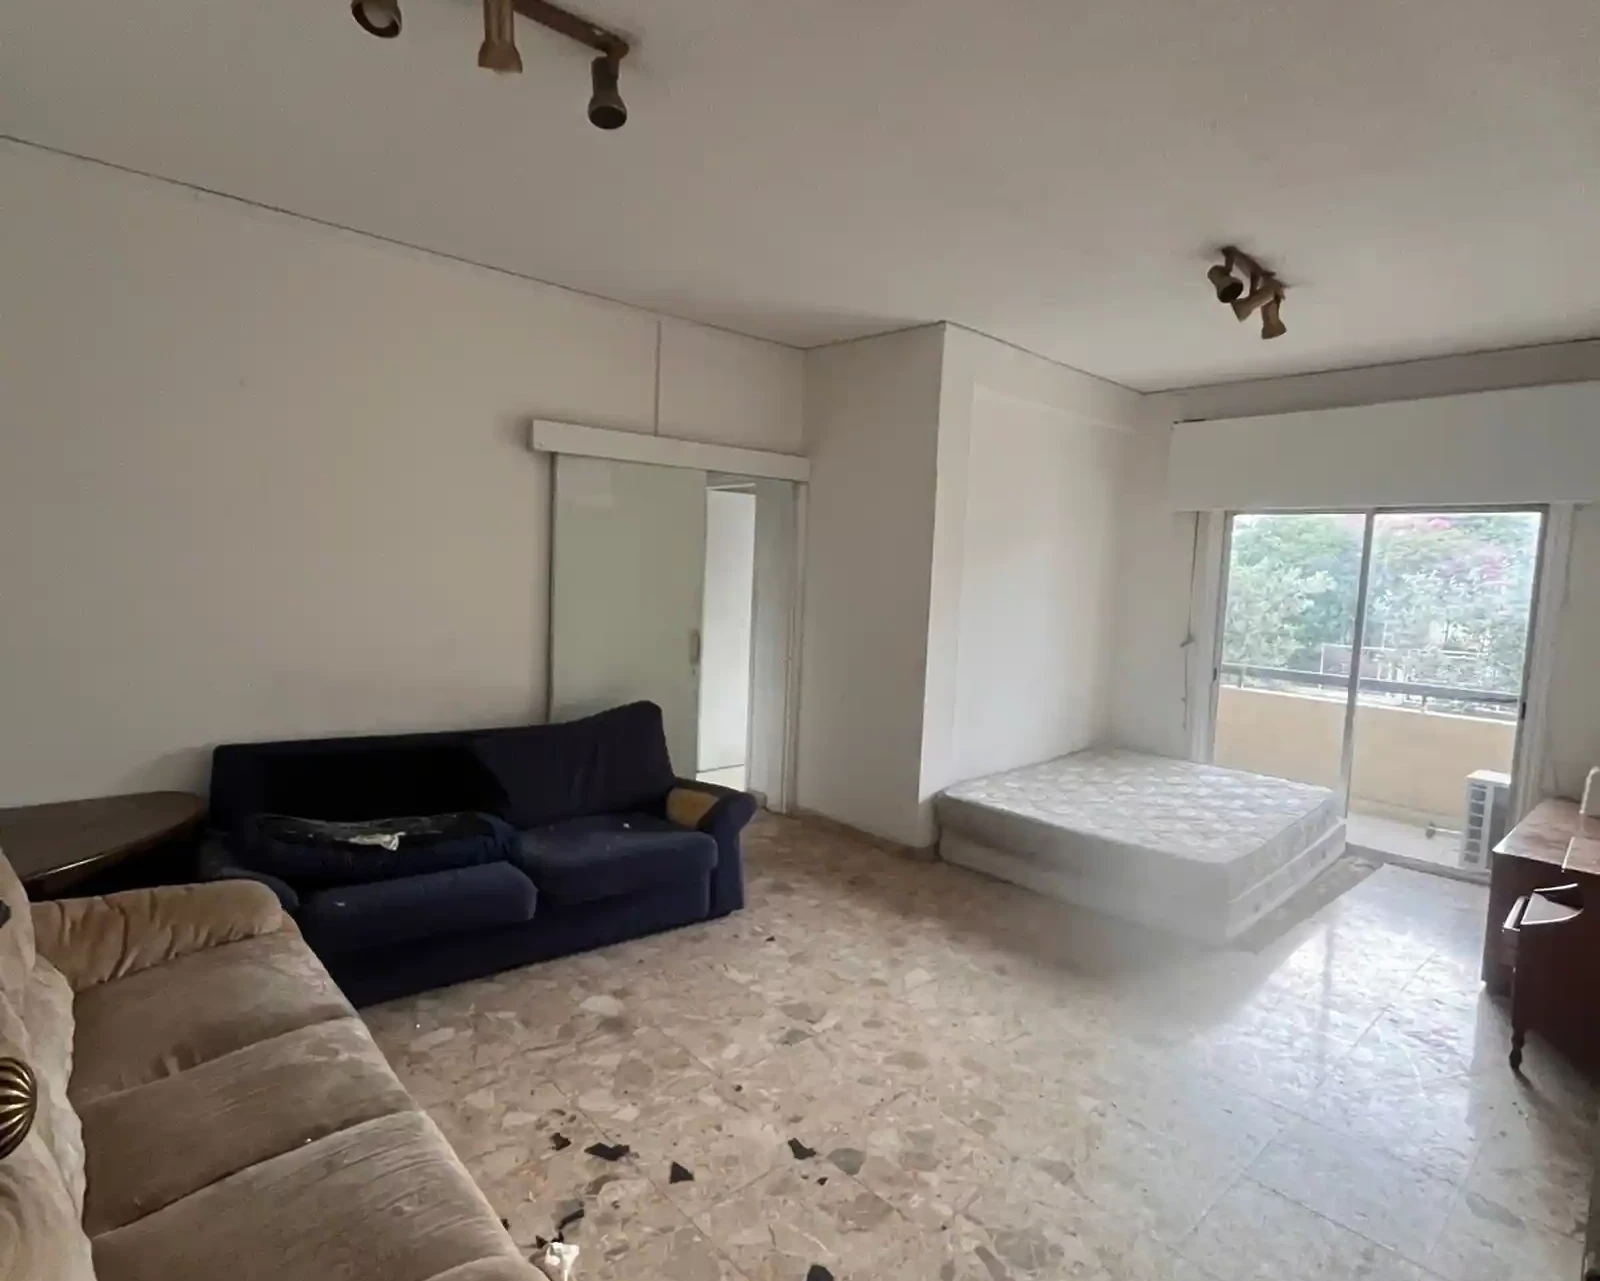 2-bedroom apartment fоr sаle €98.000, image 1